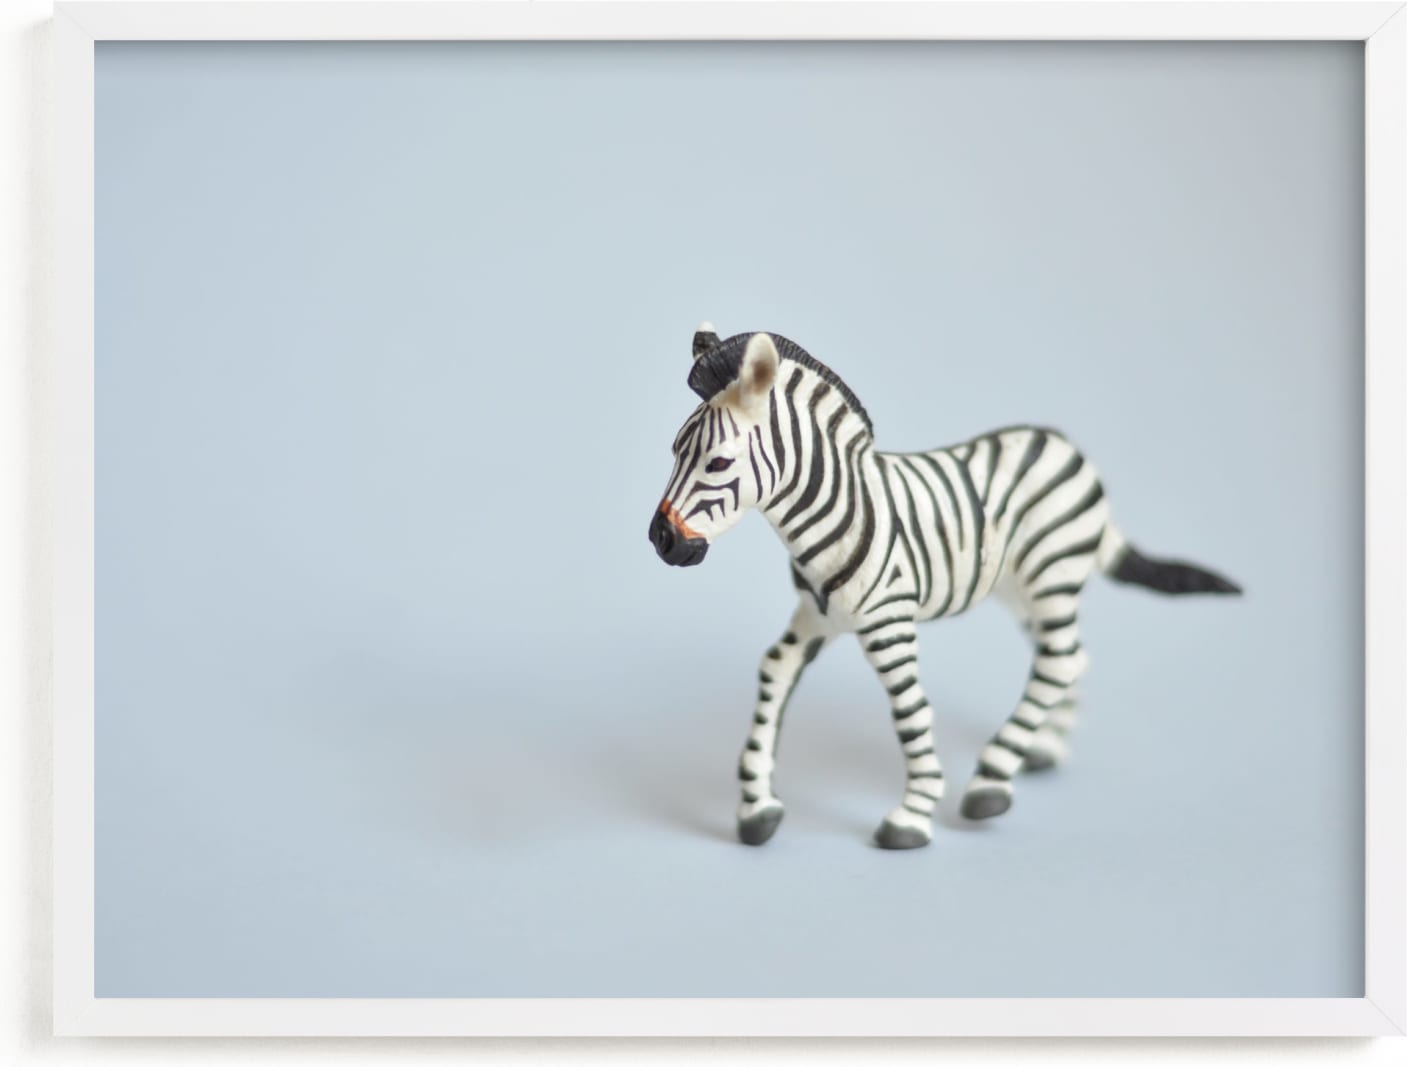 This is a black and white kids wall art by Kinga Subject called Oh, Zebra.